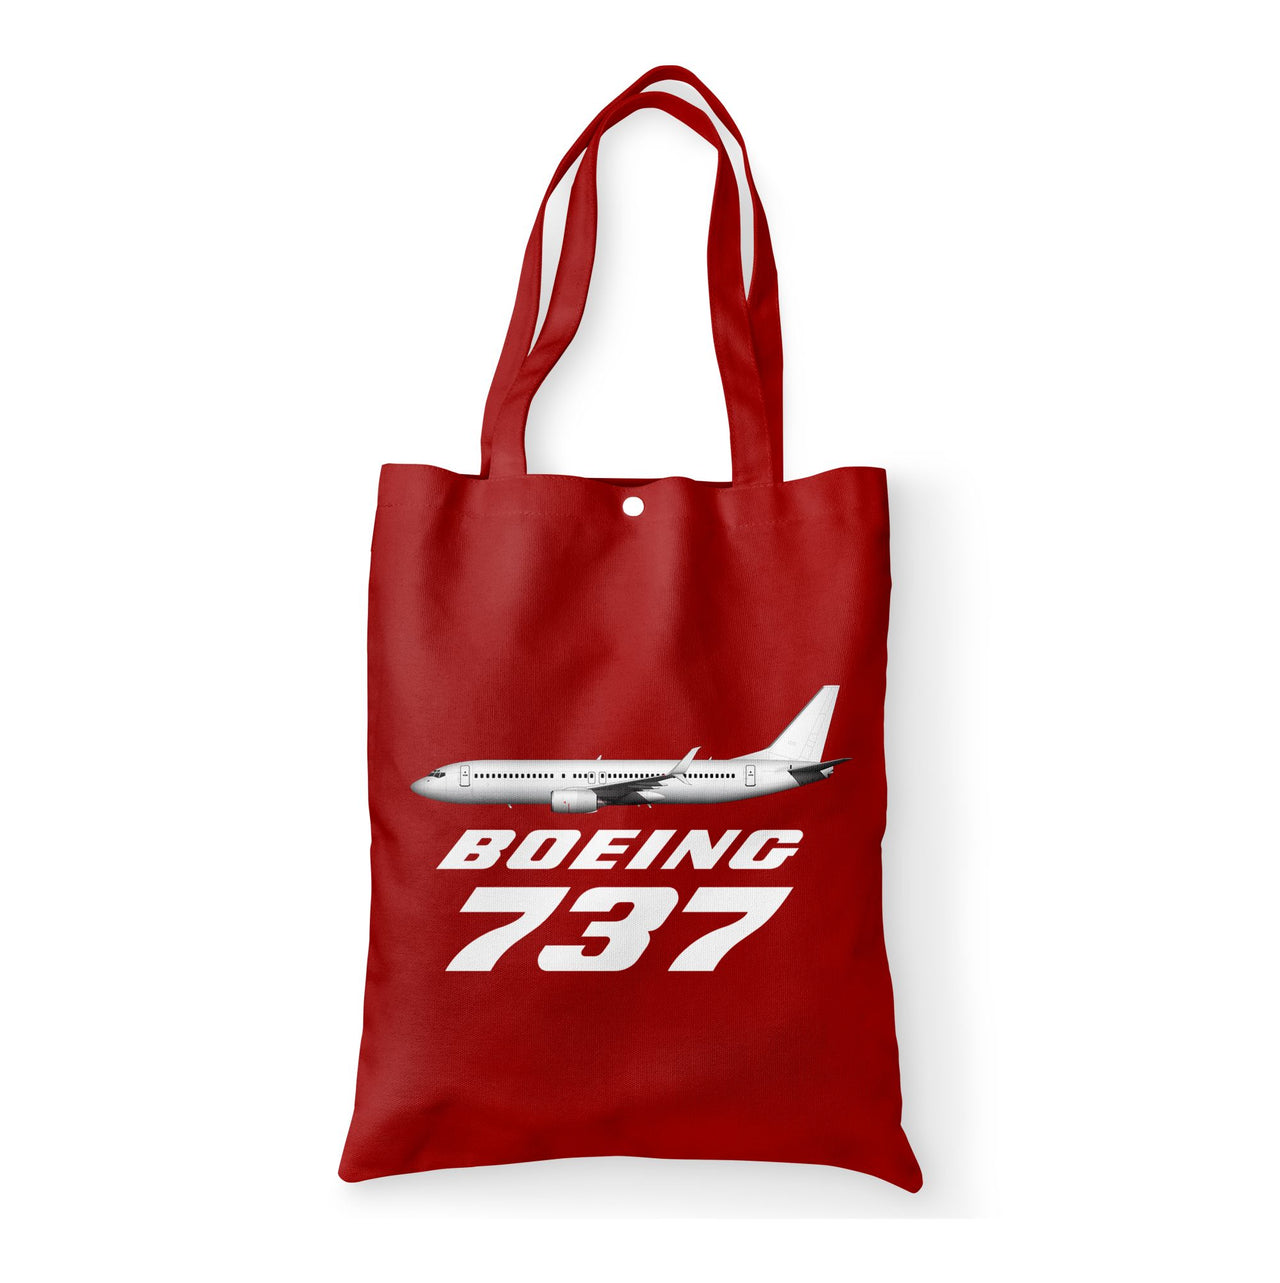 The Boeing 737 Designed Tote Bags